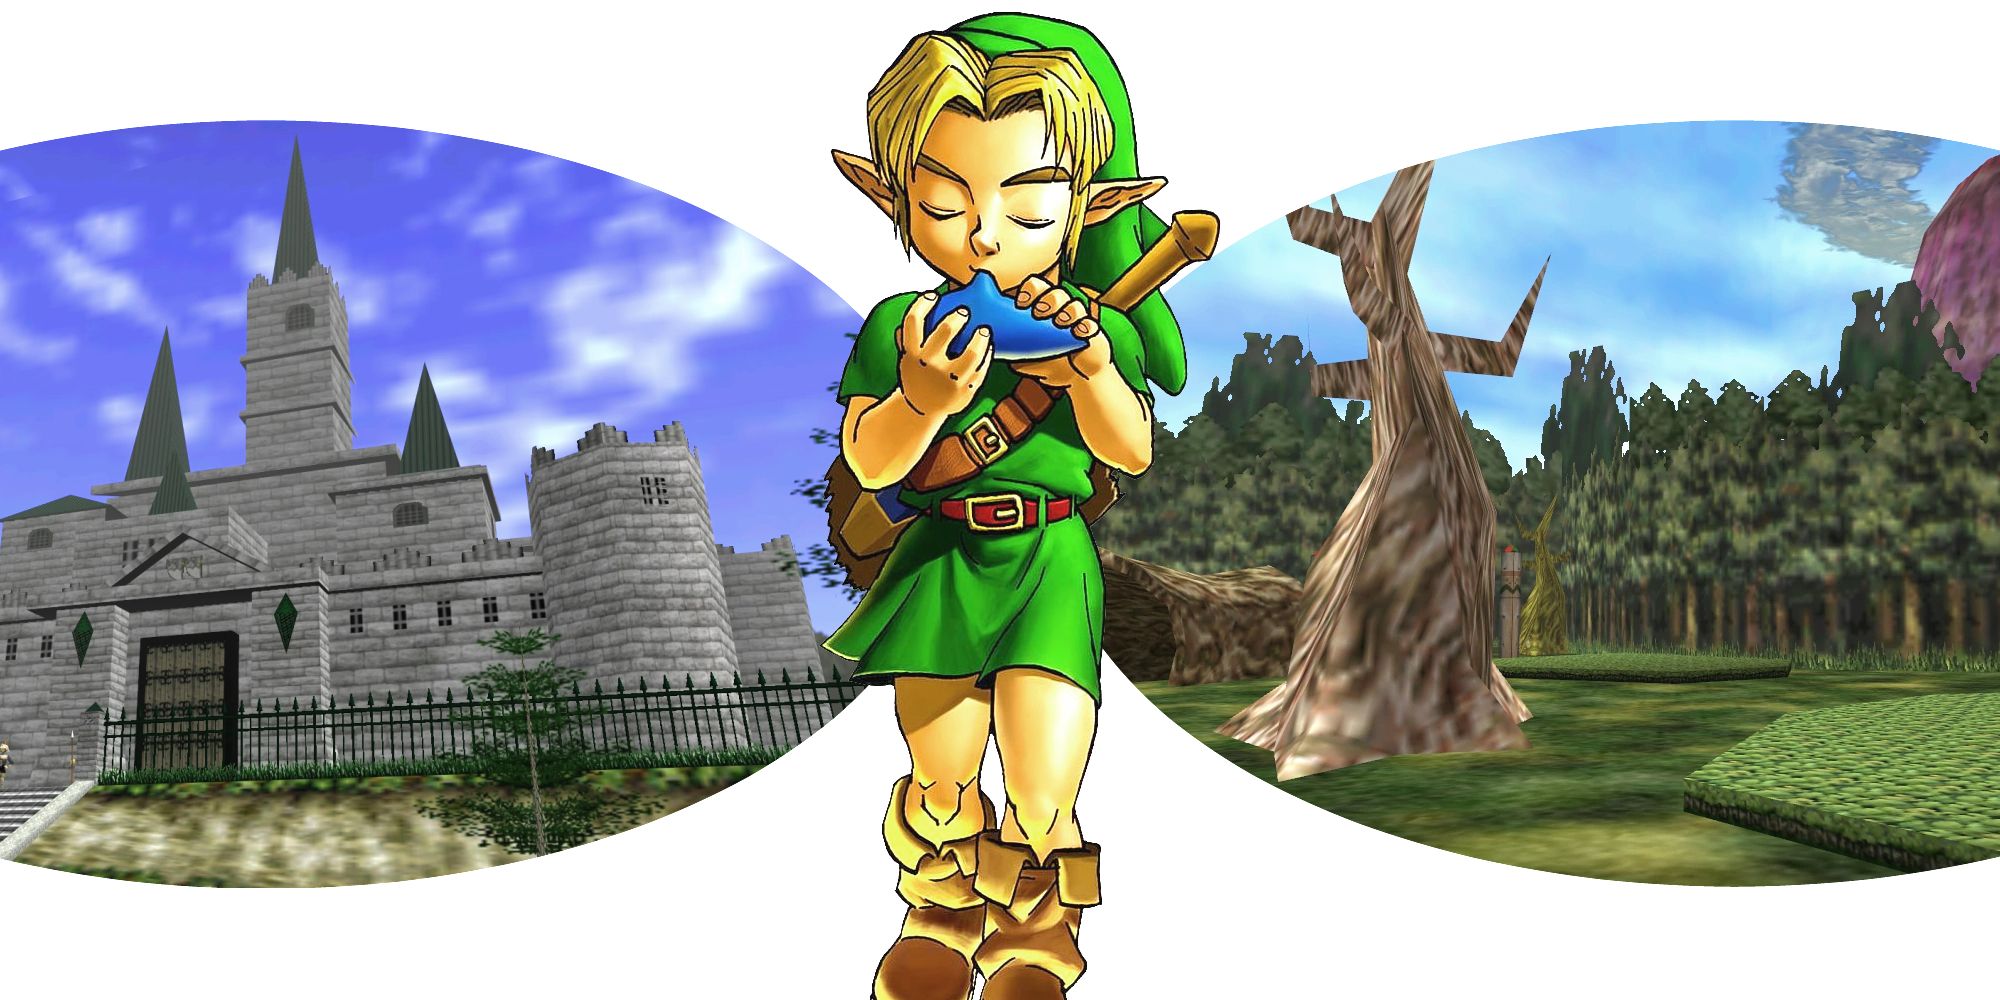 Link from The Legend of Zelda playing the ocarina between Hyrule Castle and Termina Field